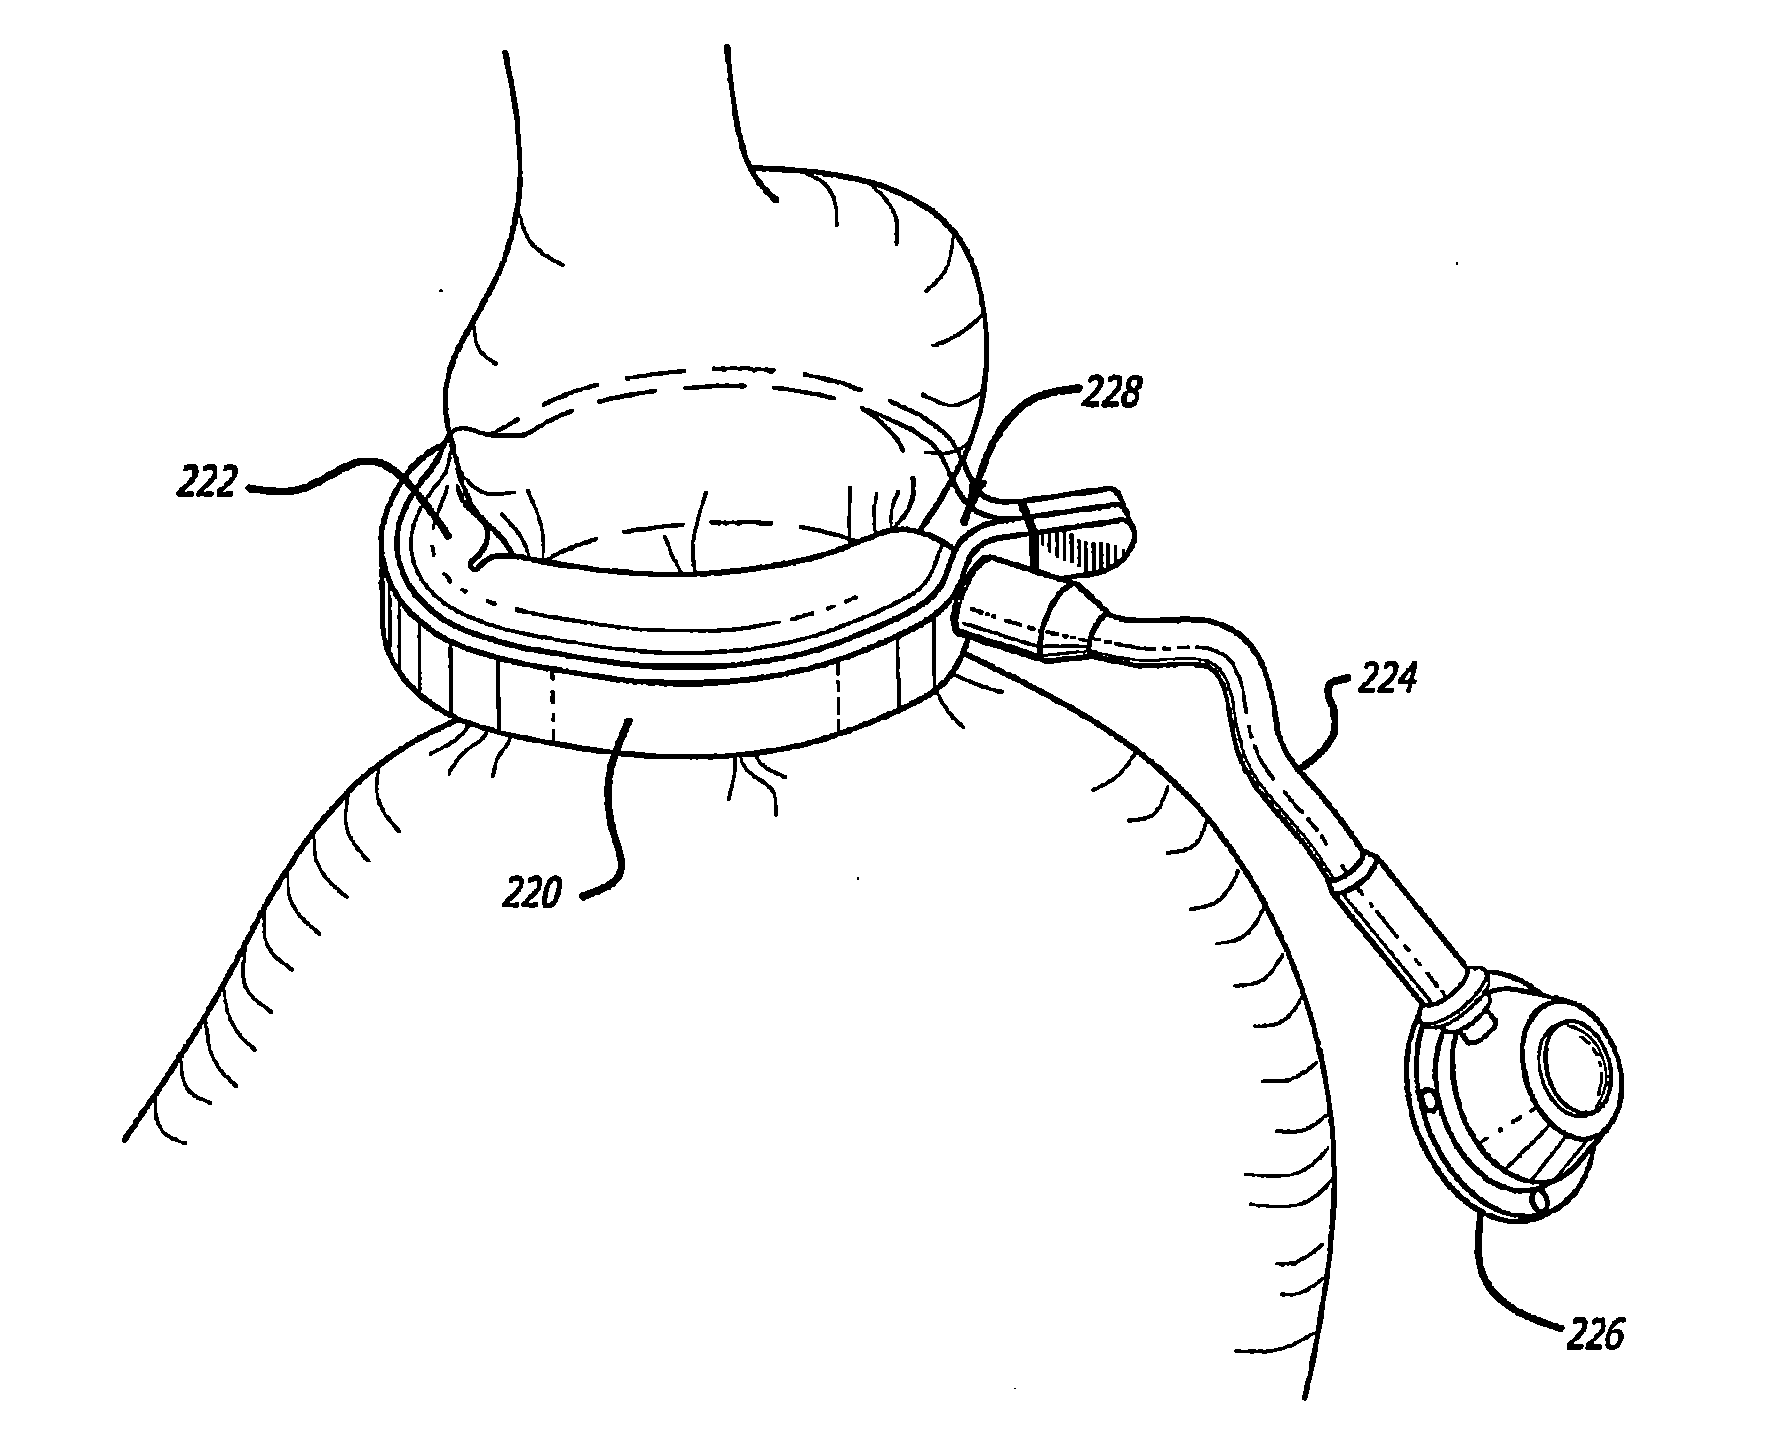 Method for modulating changes in intra-band pressure in a gastric band